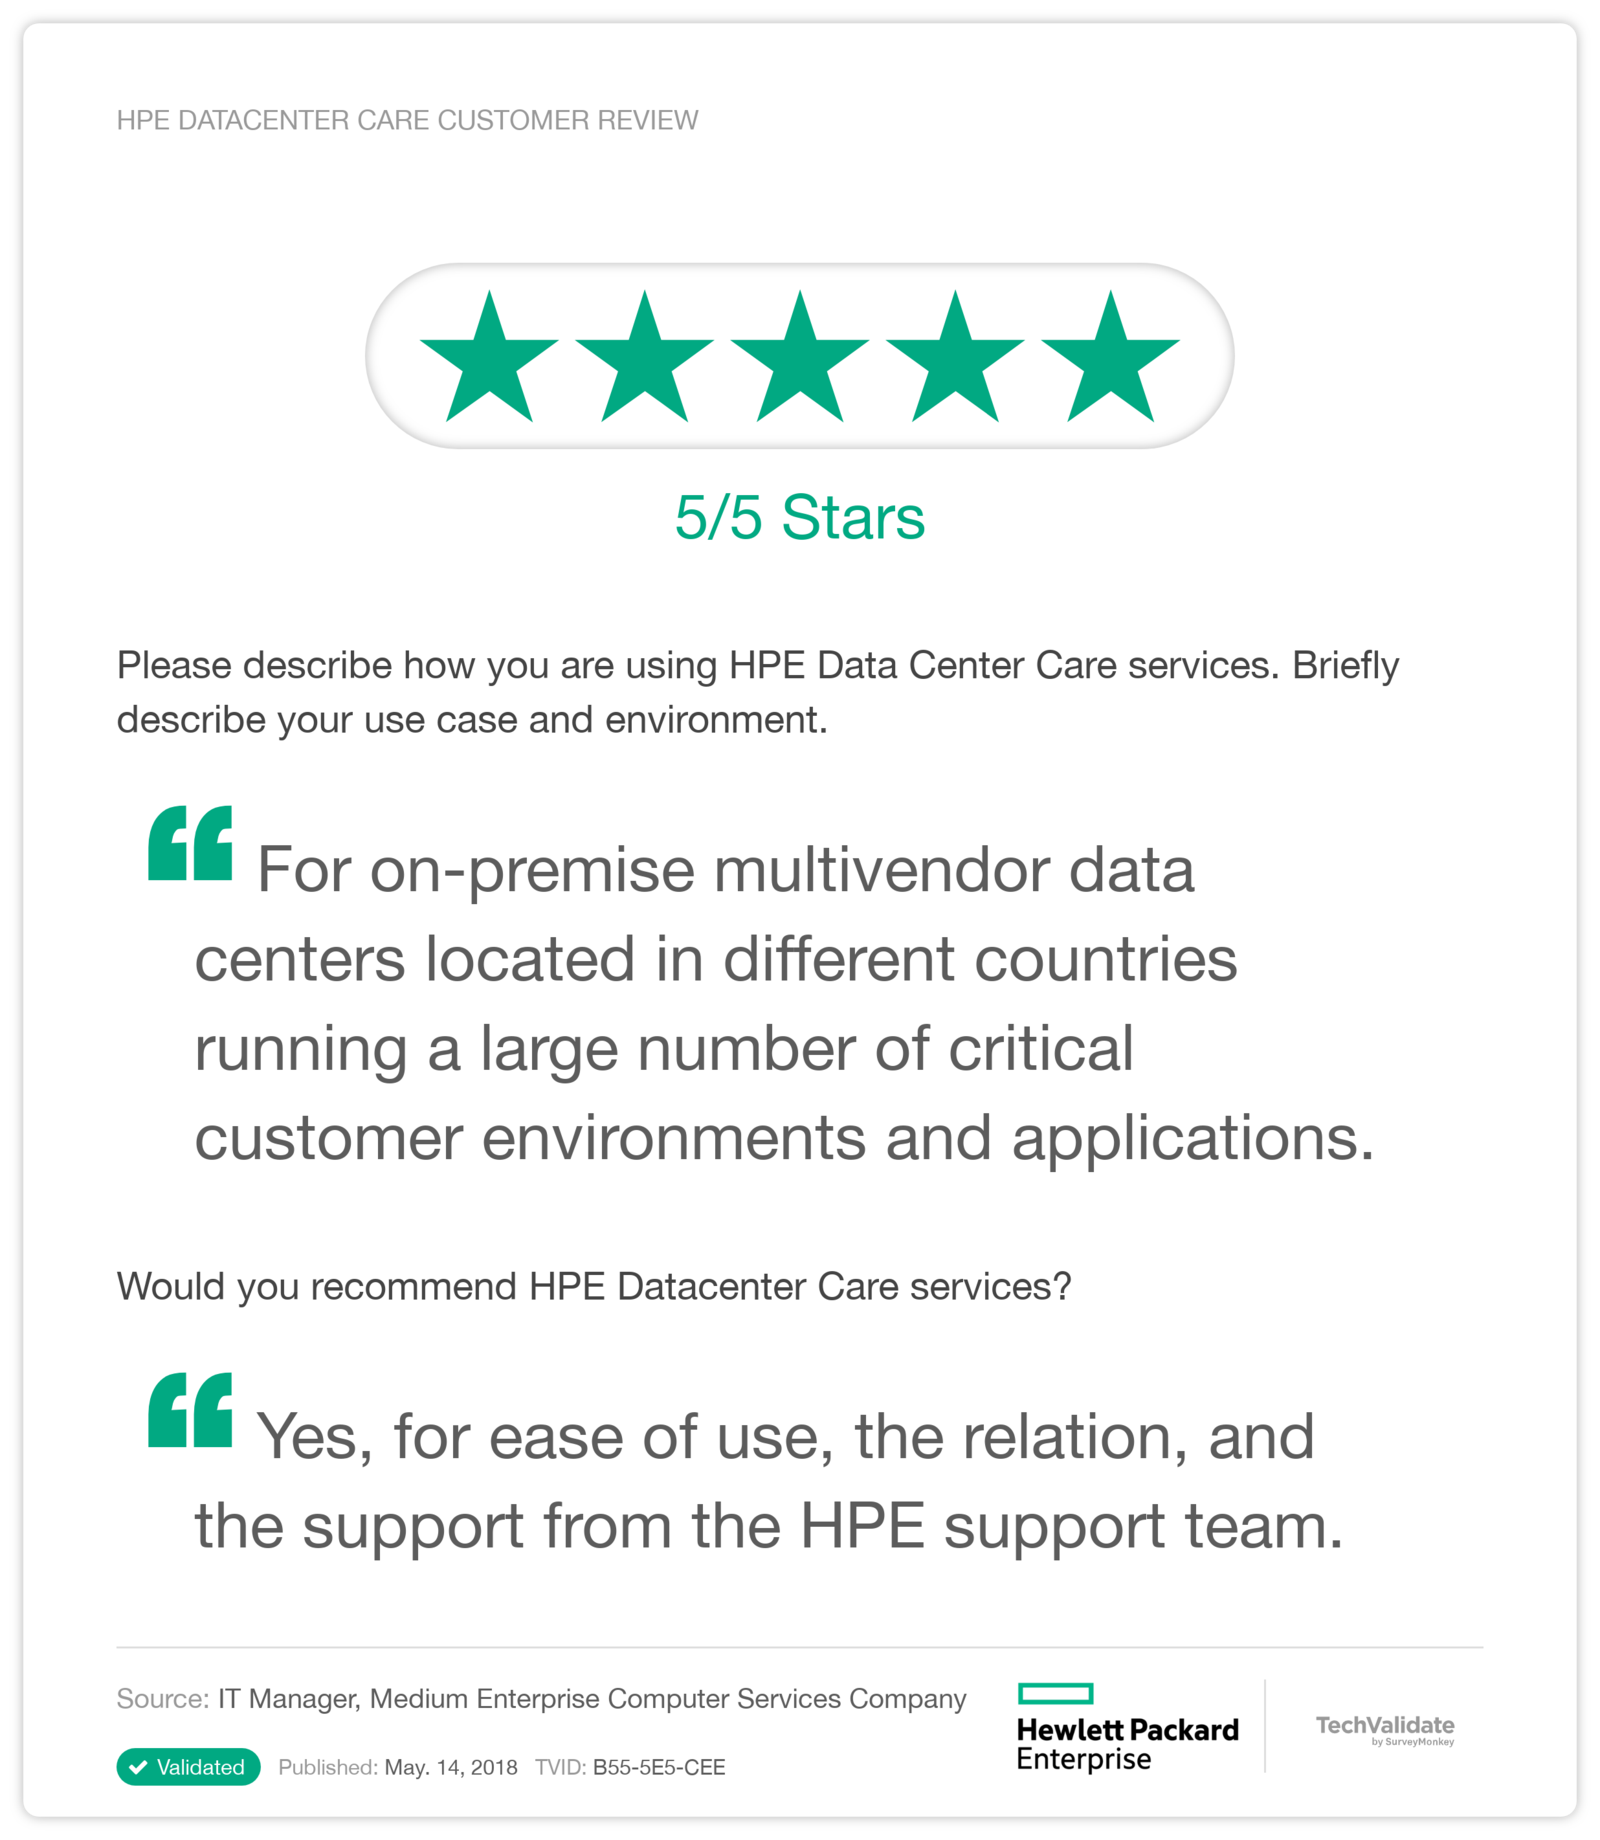 HPE Datacenter Care Customer Review